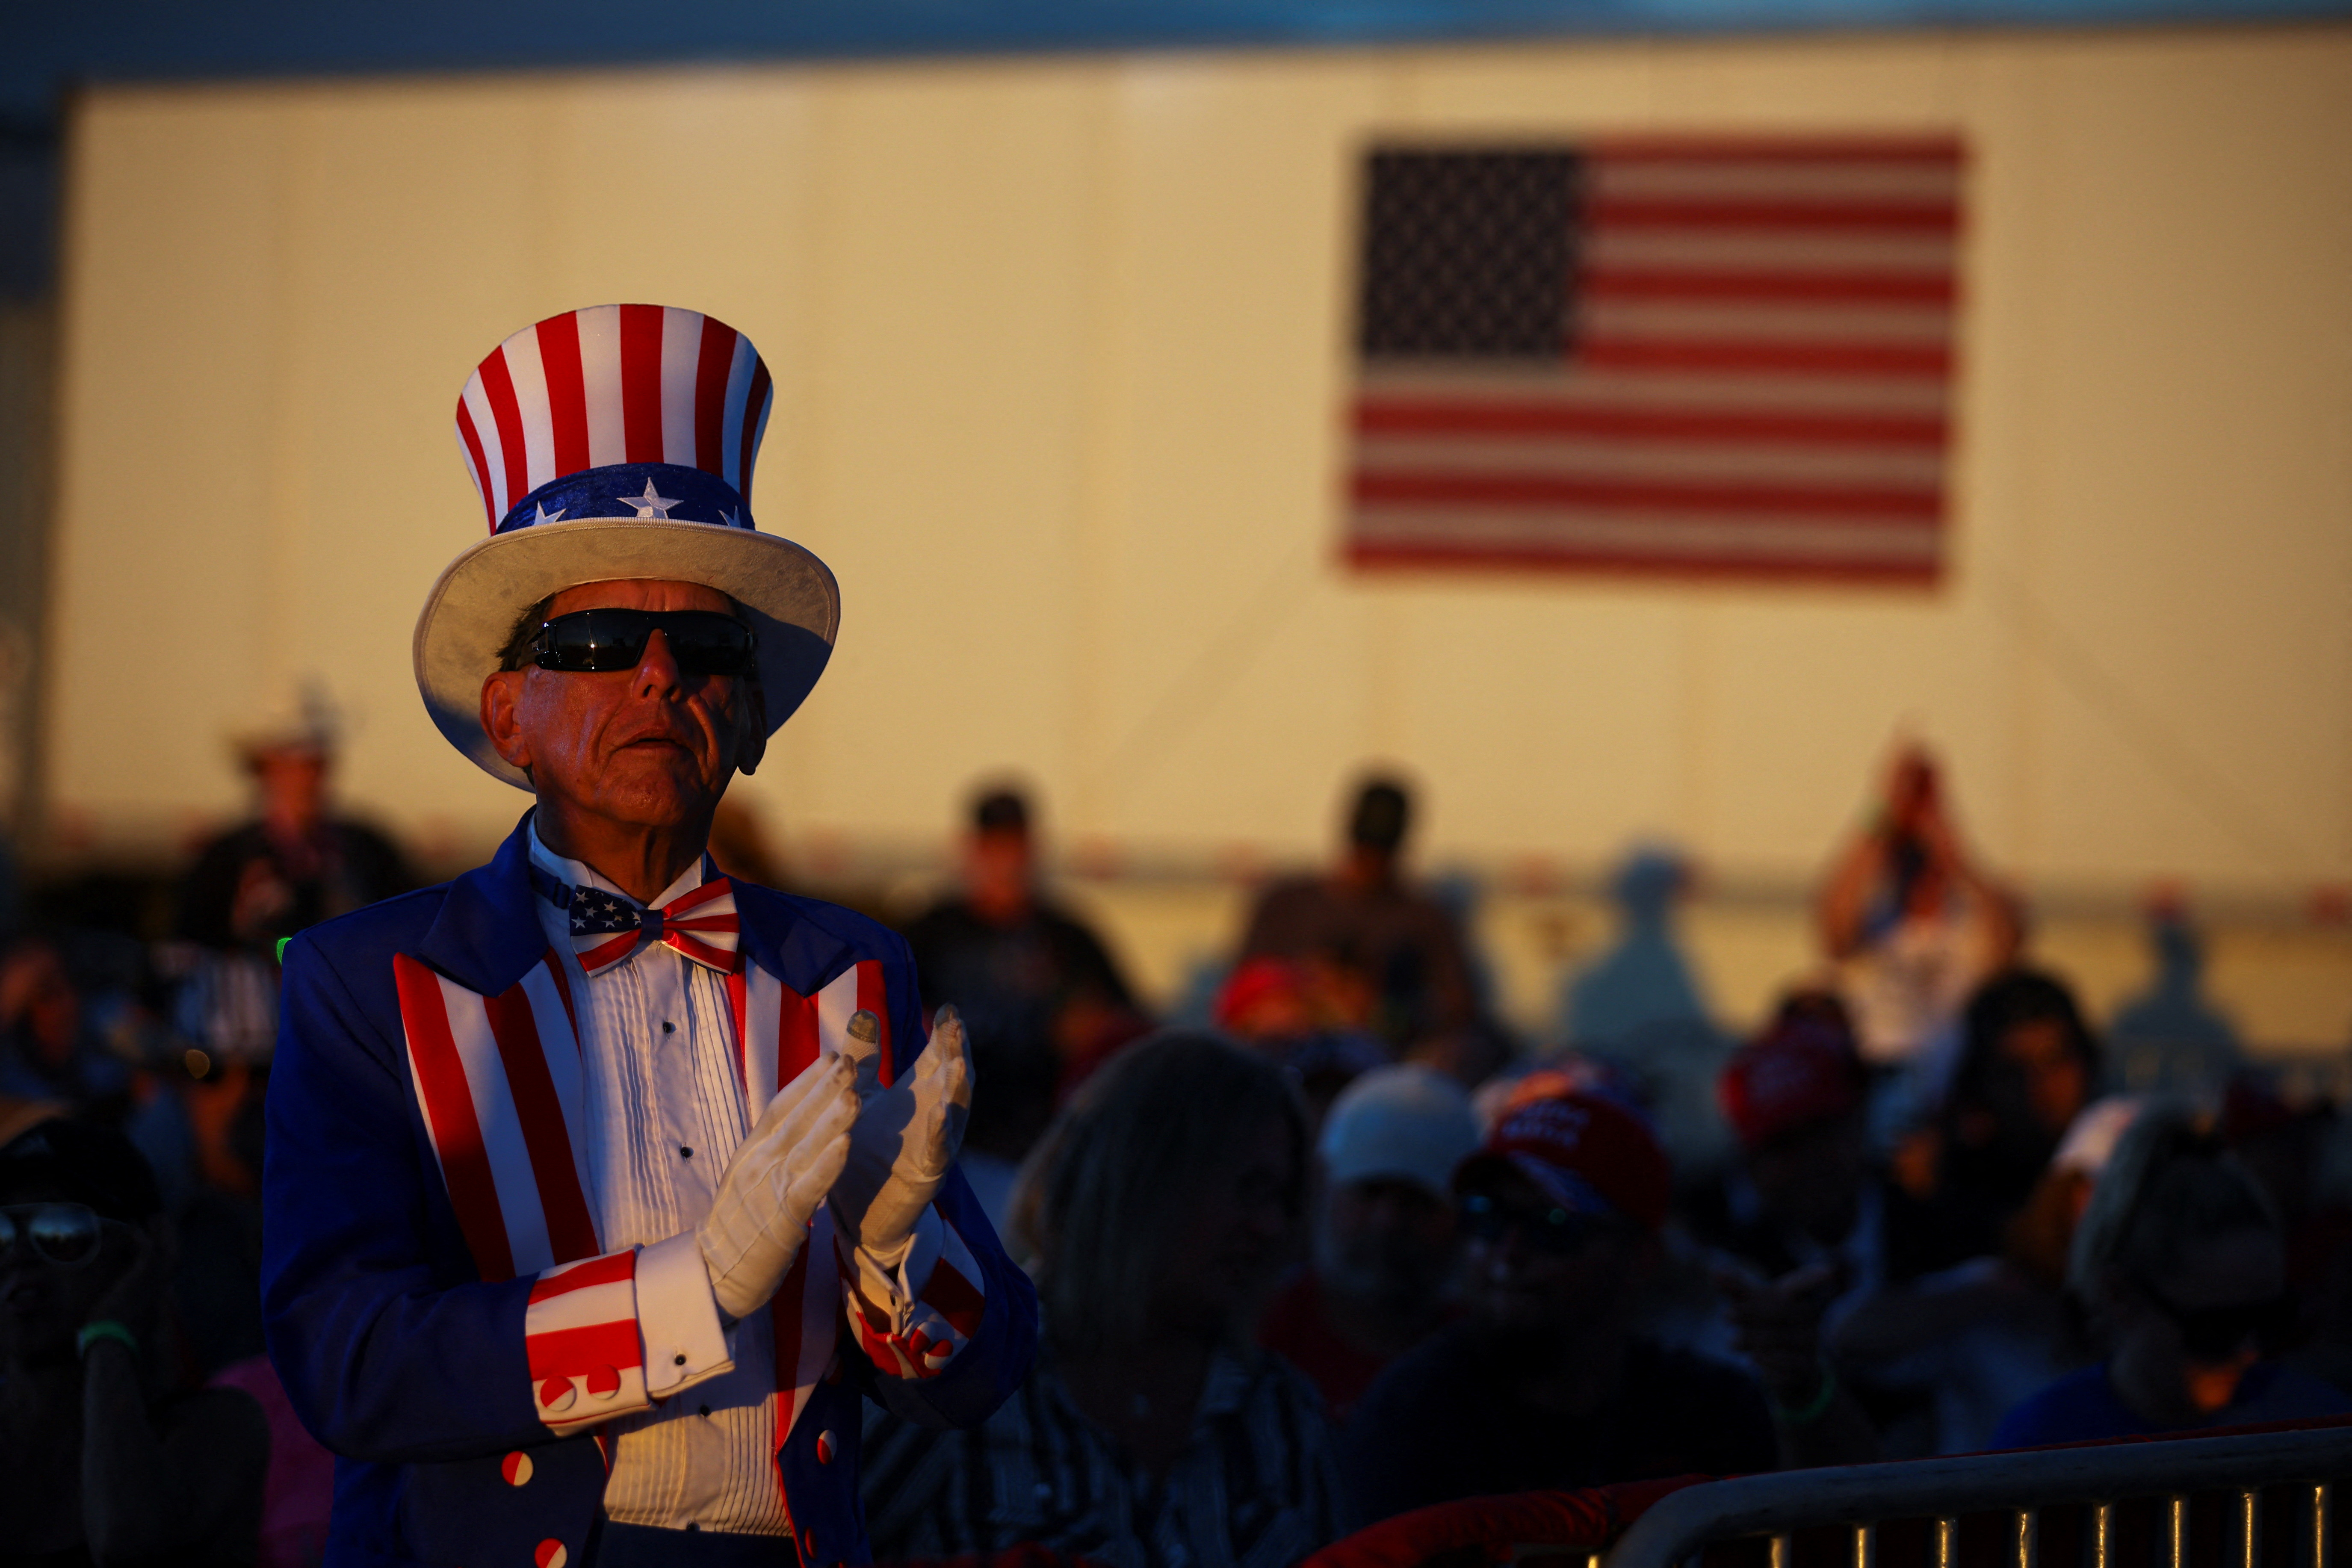 A man disguised as "Uncle Sam" during one of Donald Trump's appearances with the candidates for the November legislative elections in Arizona.  (REUTERS/Brian Snyder)